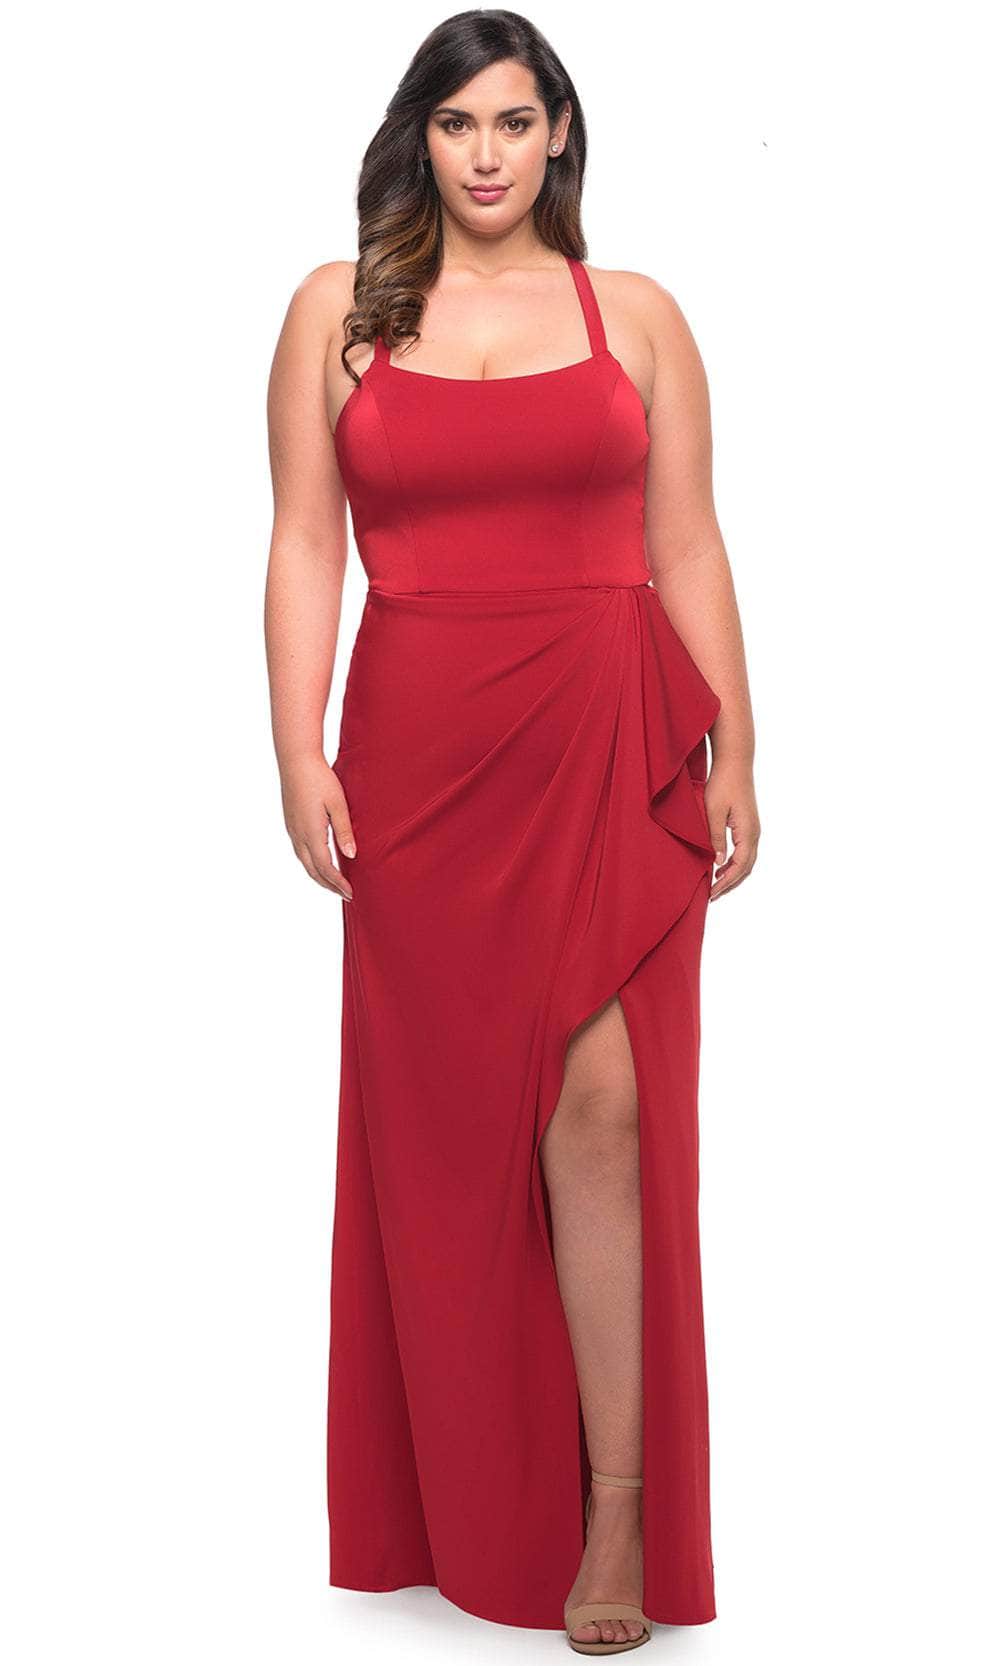 La Femme 29634 - Sleeveless Ruffled Long Dress Special Occasion Dress 12W / Red